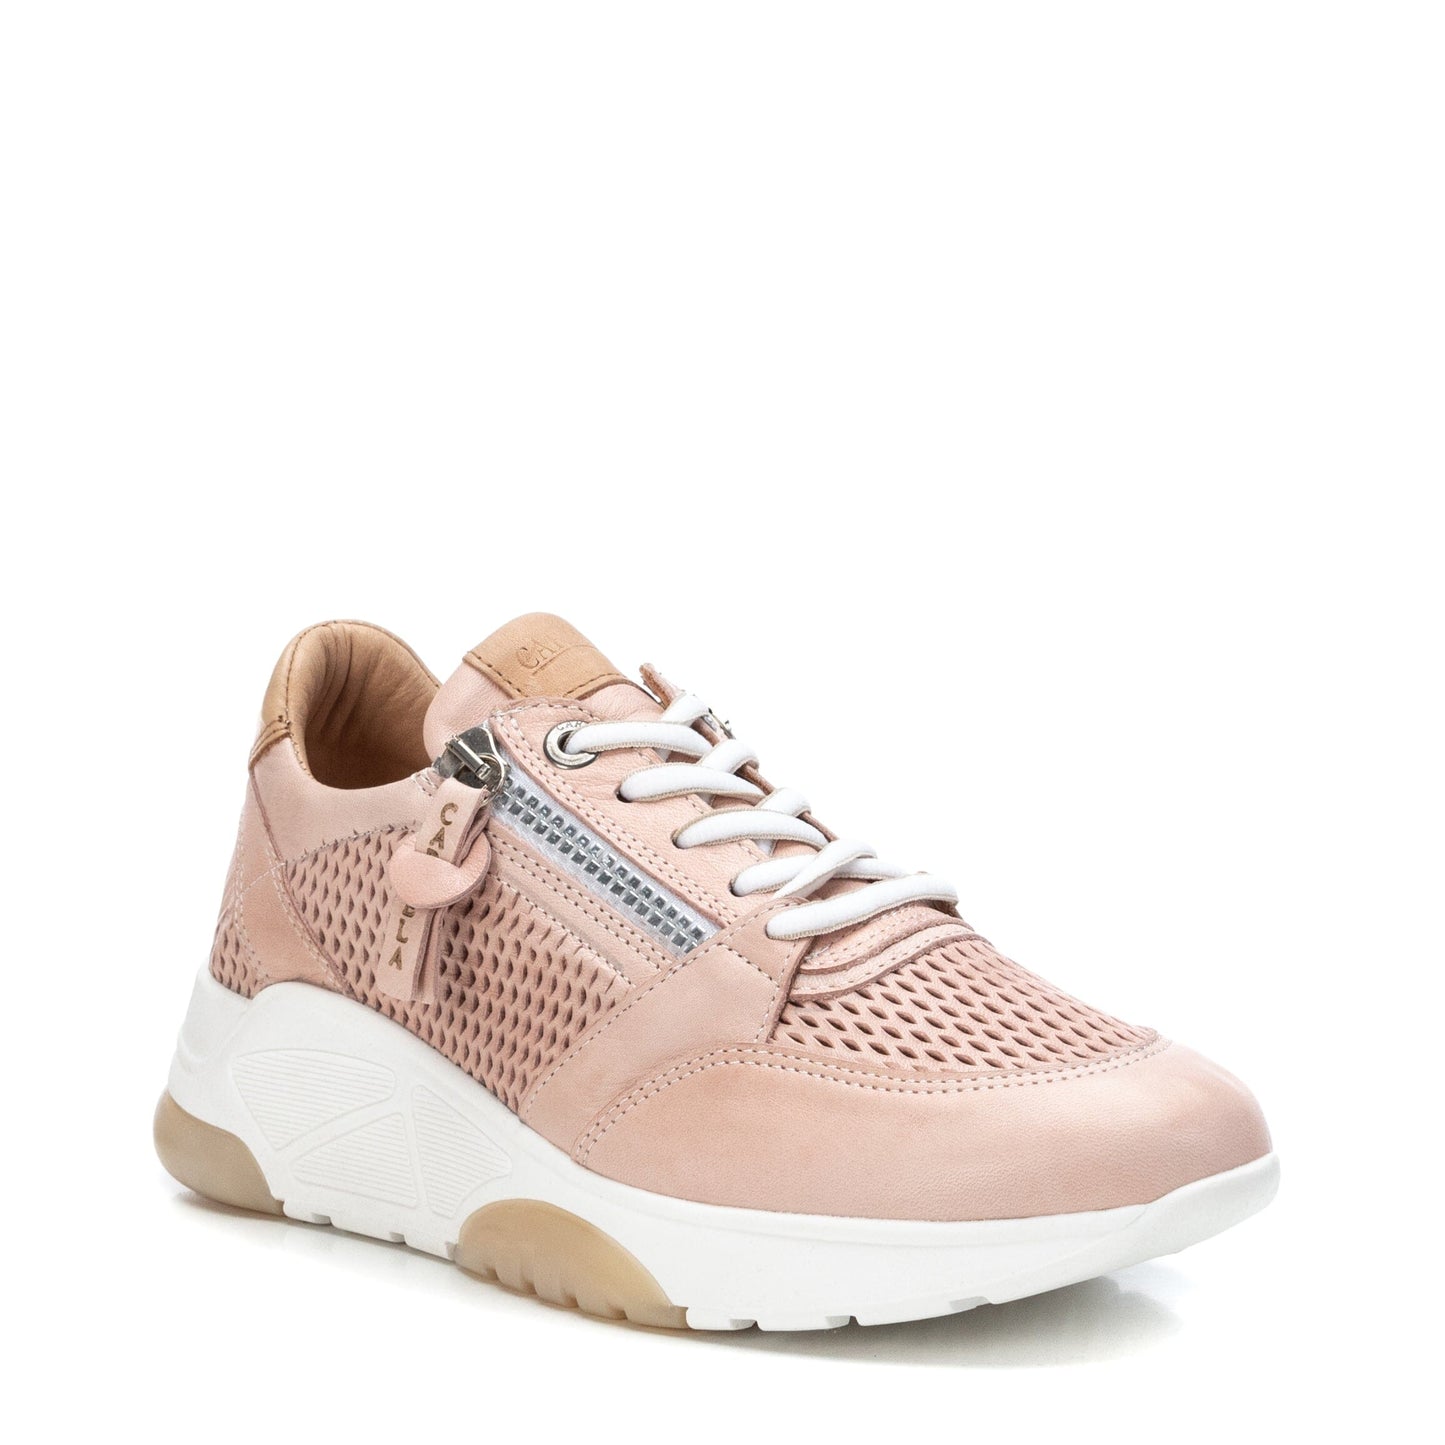 68247 Spanish Collection genuine leather sneakers with laser cut detail and zips sneakers Sam Star shoes Pale pink 39 